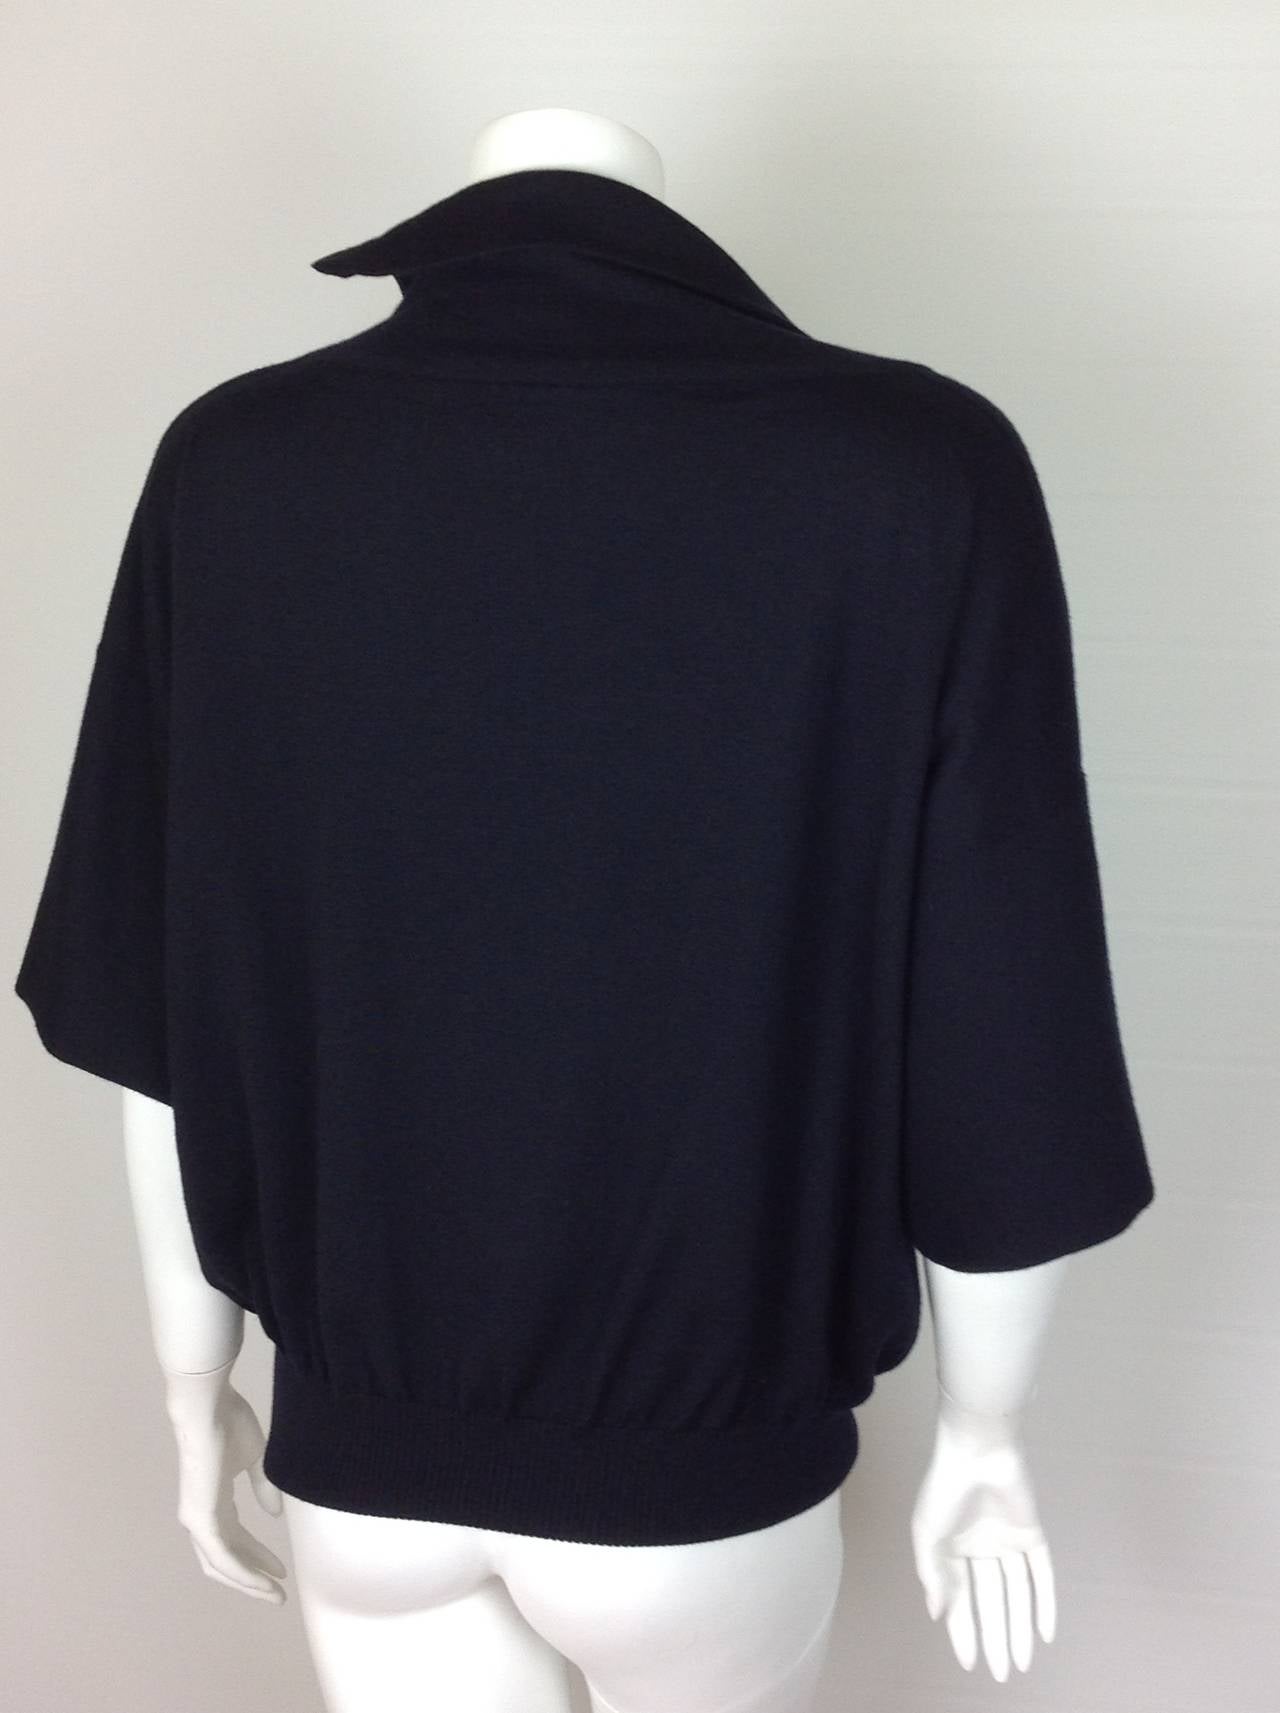 Black Hermes cashmere convertible sweater  Size 34 3